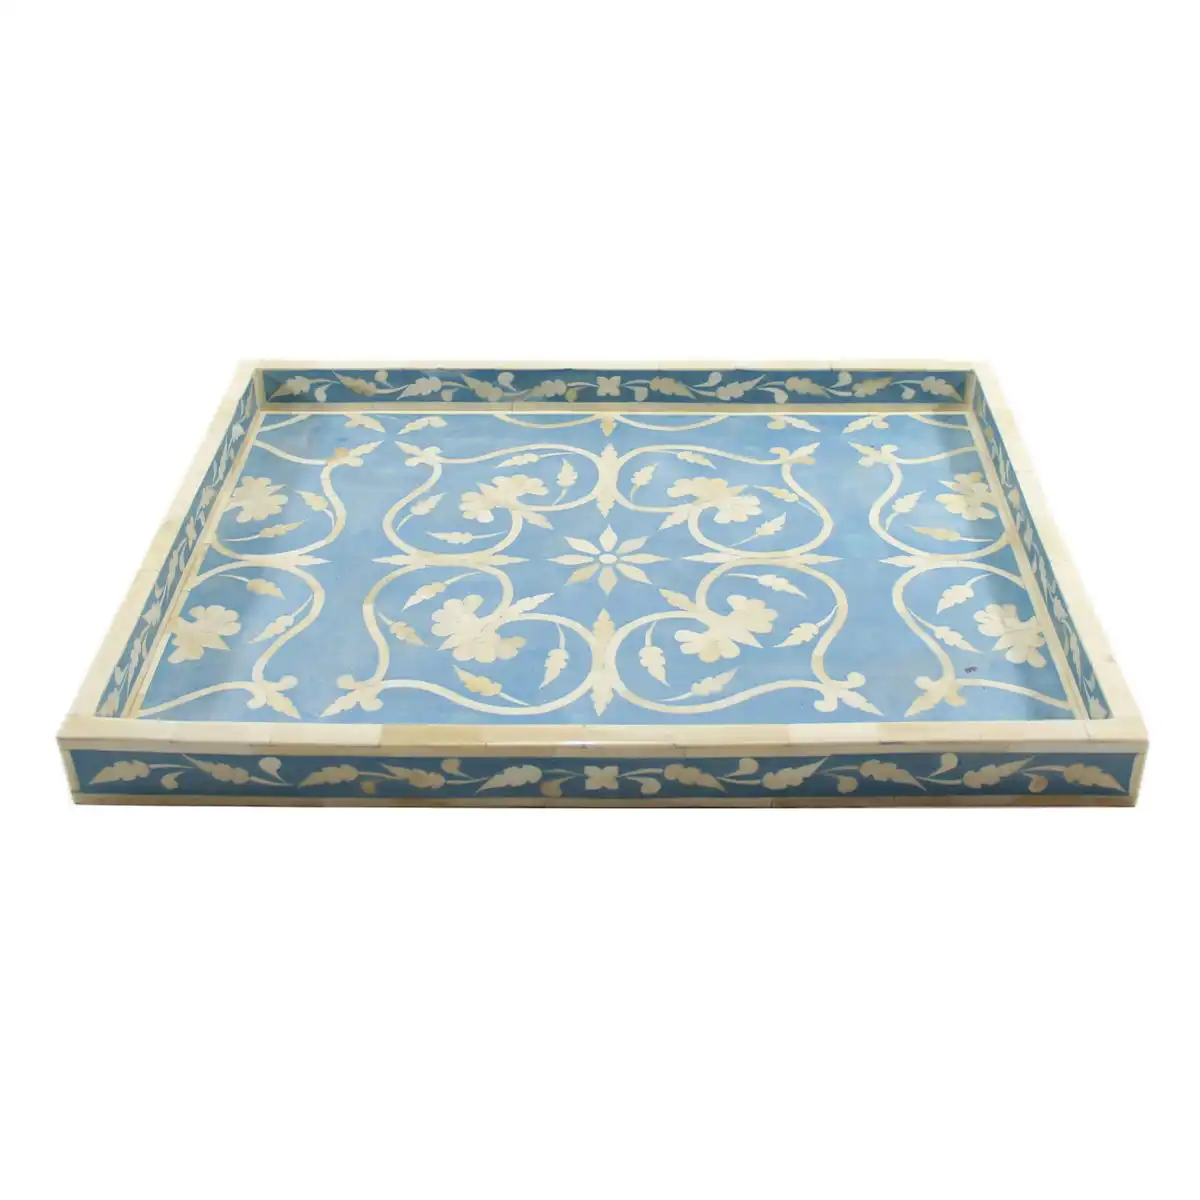 Exclusive Quality Bone Inlay Tray Newest Design For Home Office Hotel Wedding Parties Bone Inlay Serving Tray